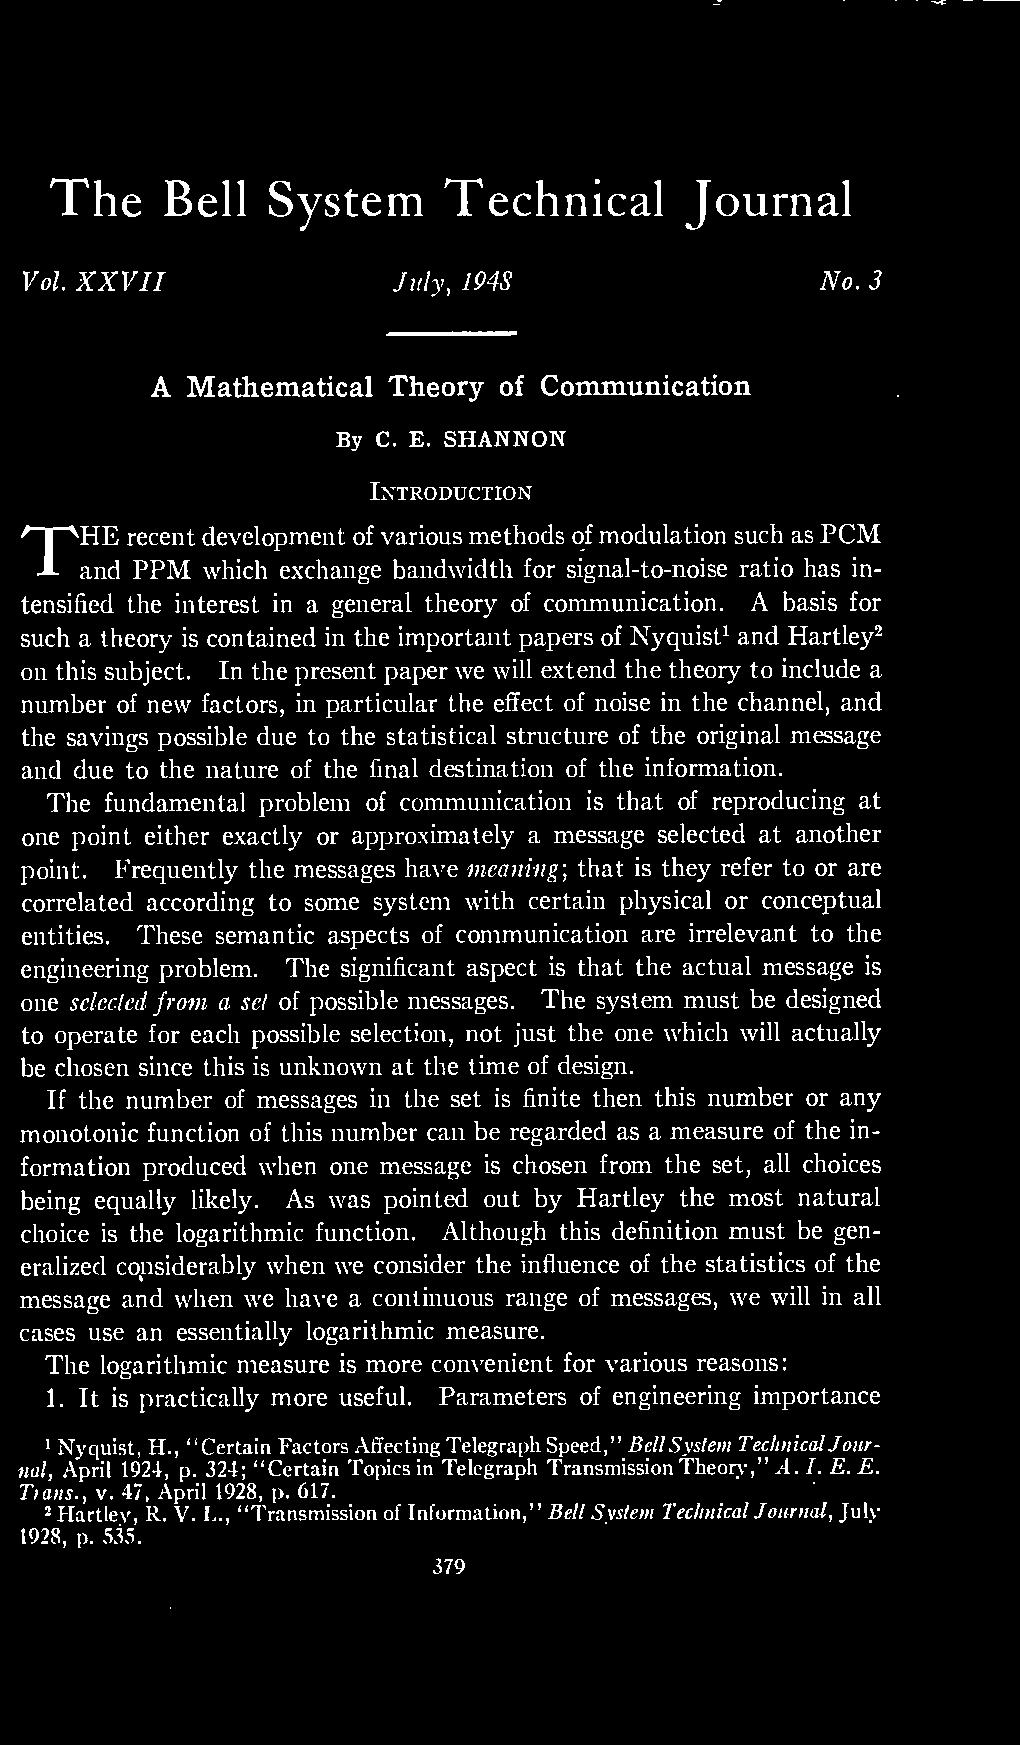 communication. A basis for such a theory is contained in the important papers of Nyquist 1 and Hartley 2 on this subject.